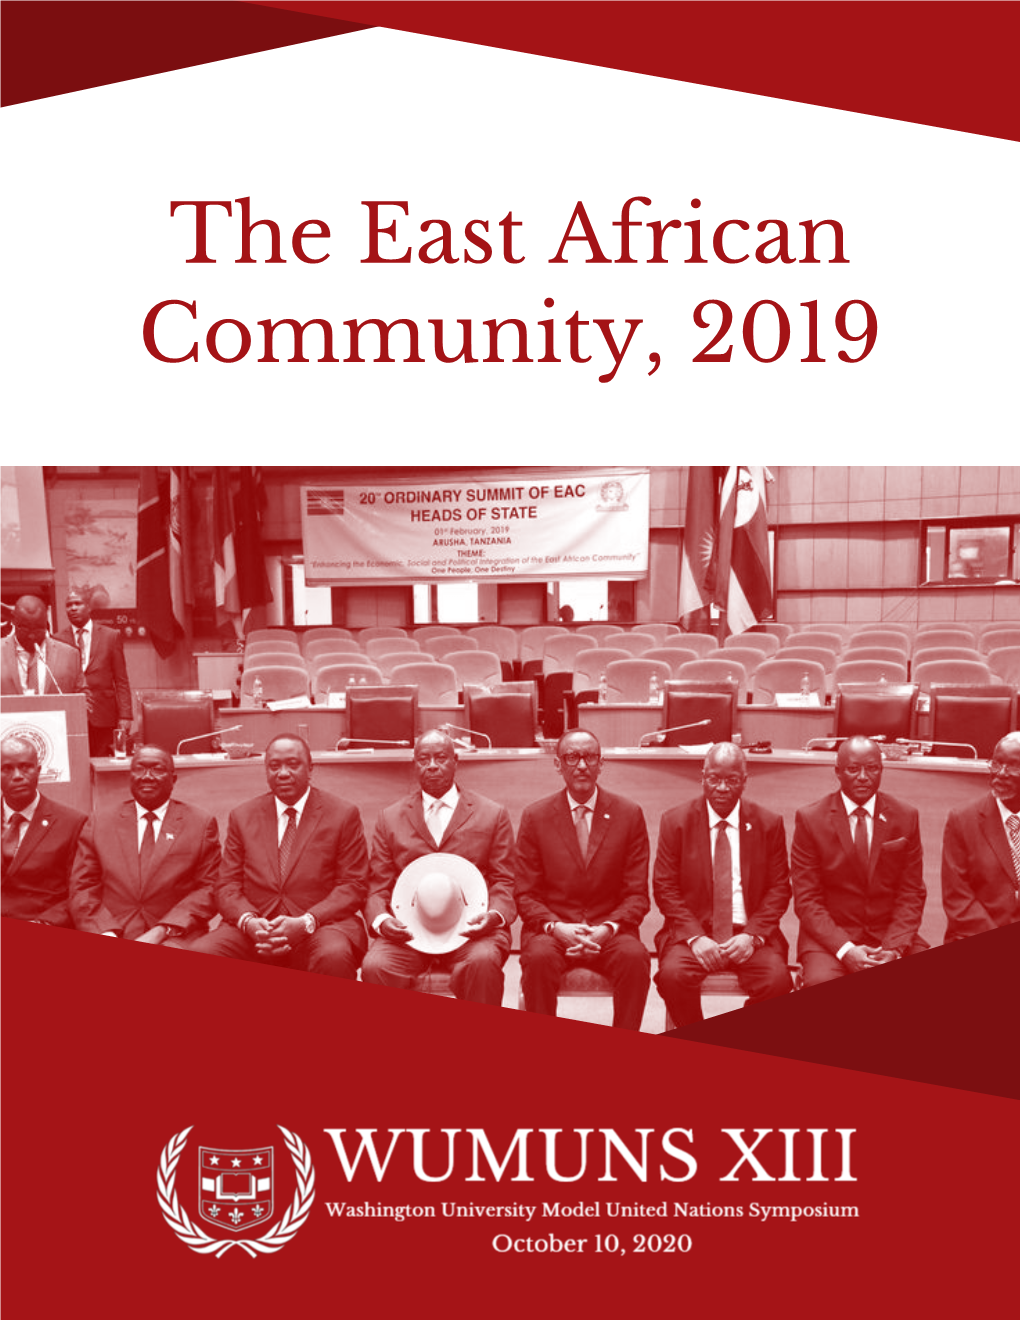 The East African Community, 2019